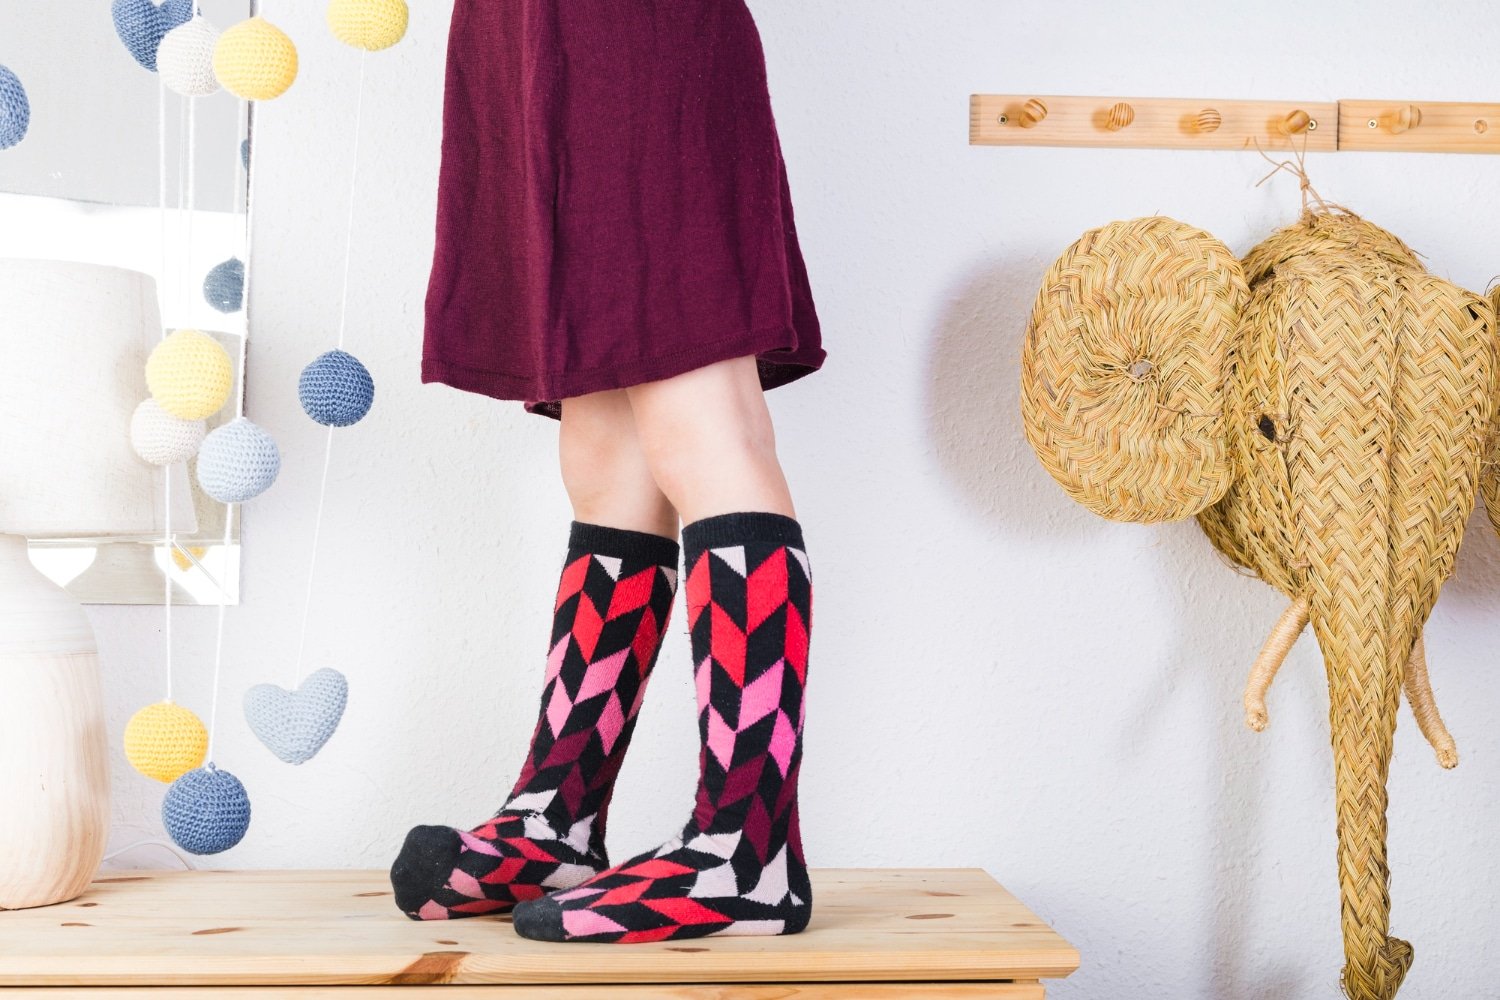 You are currently viewing Find Stylish Socks And Hosiery At Sock Shop